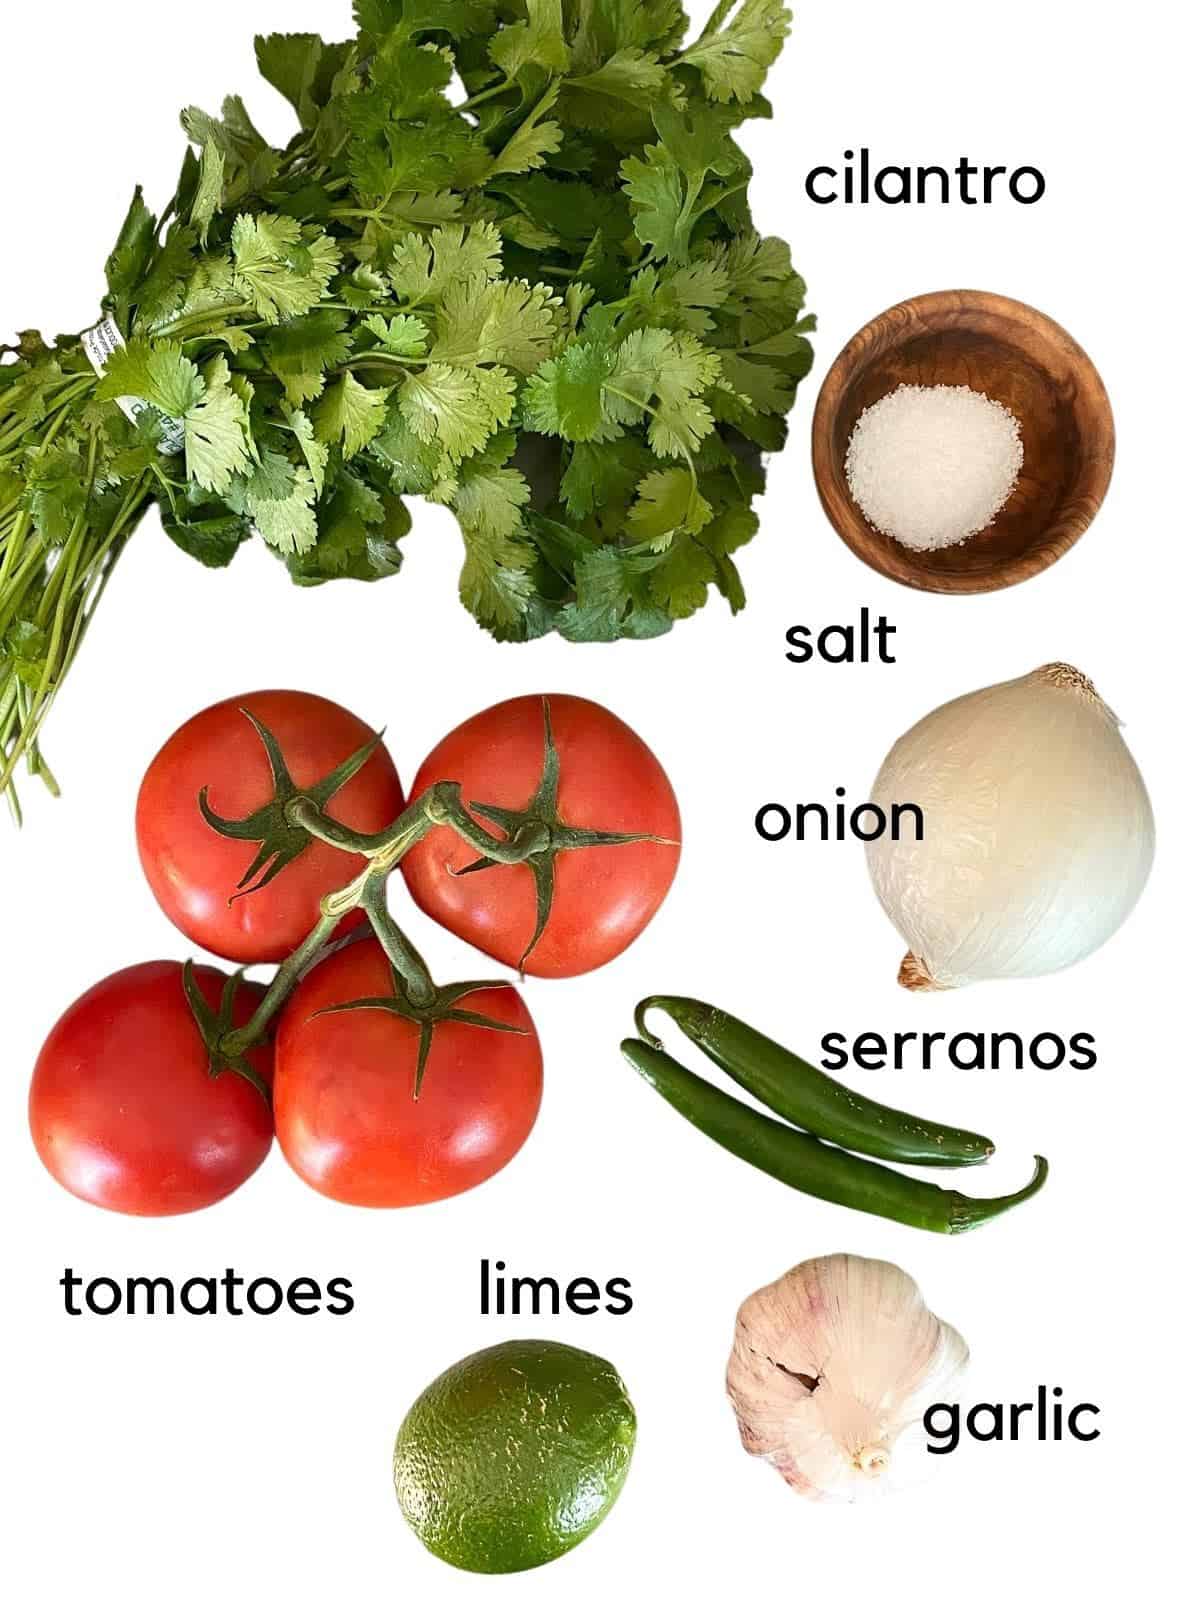 ingredients you'll need for pico de gallo, cilantro, tomatoes, salt, onion, peppers, garlic, and limes